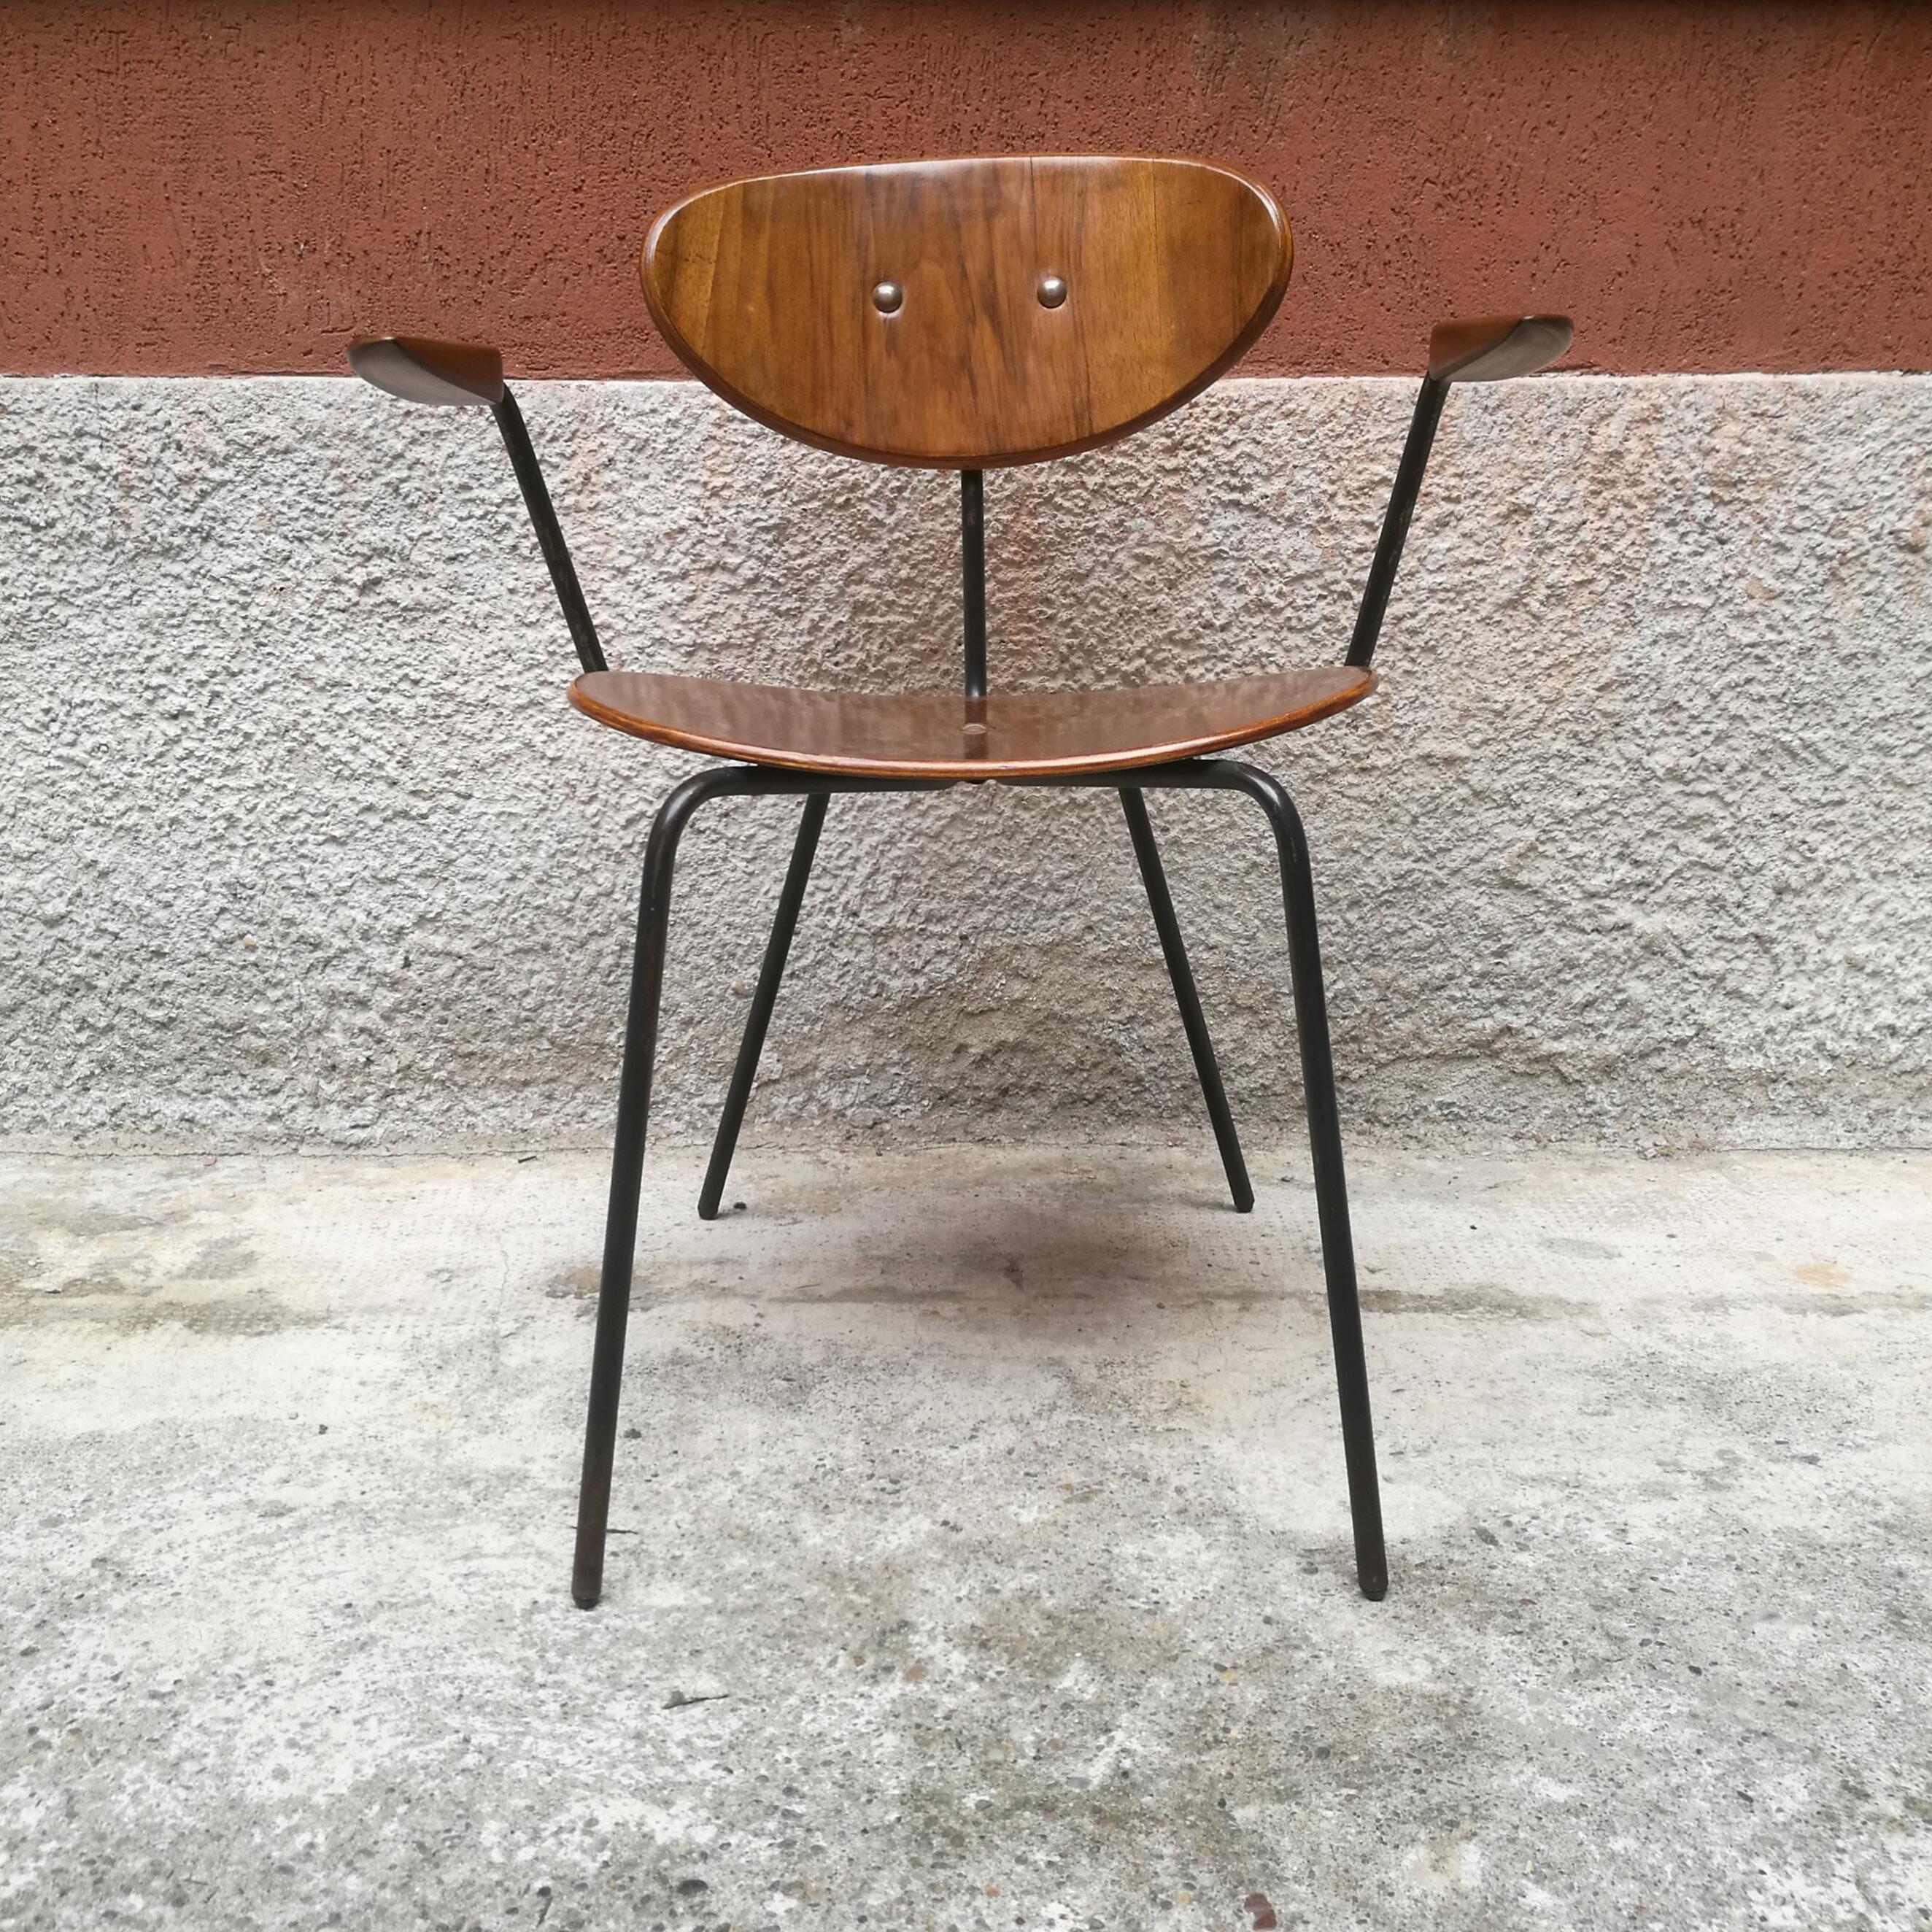 Teak chair with armrests from Germany, 1960s
German unique chair from 1960s, made in teak and metal. Seats and armrests are in teak, while the structure is in black metal thin rod. Absolutely stunning presence, on a piece that can live alone or